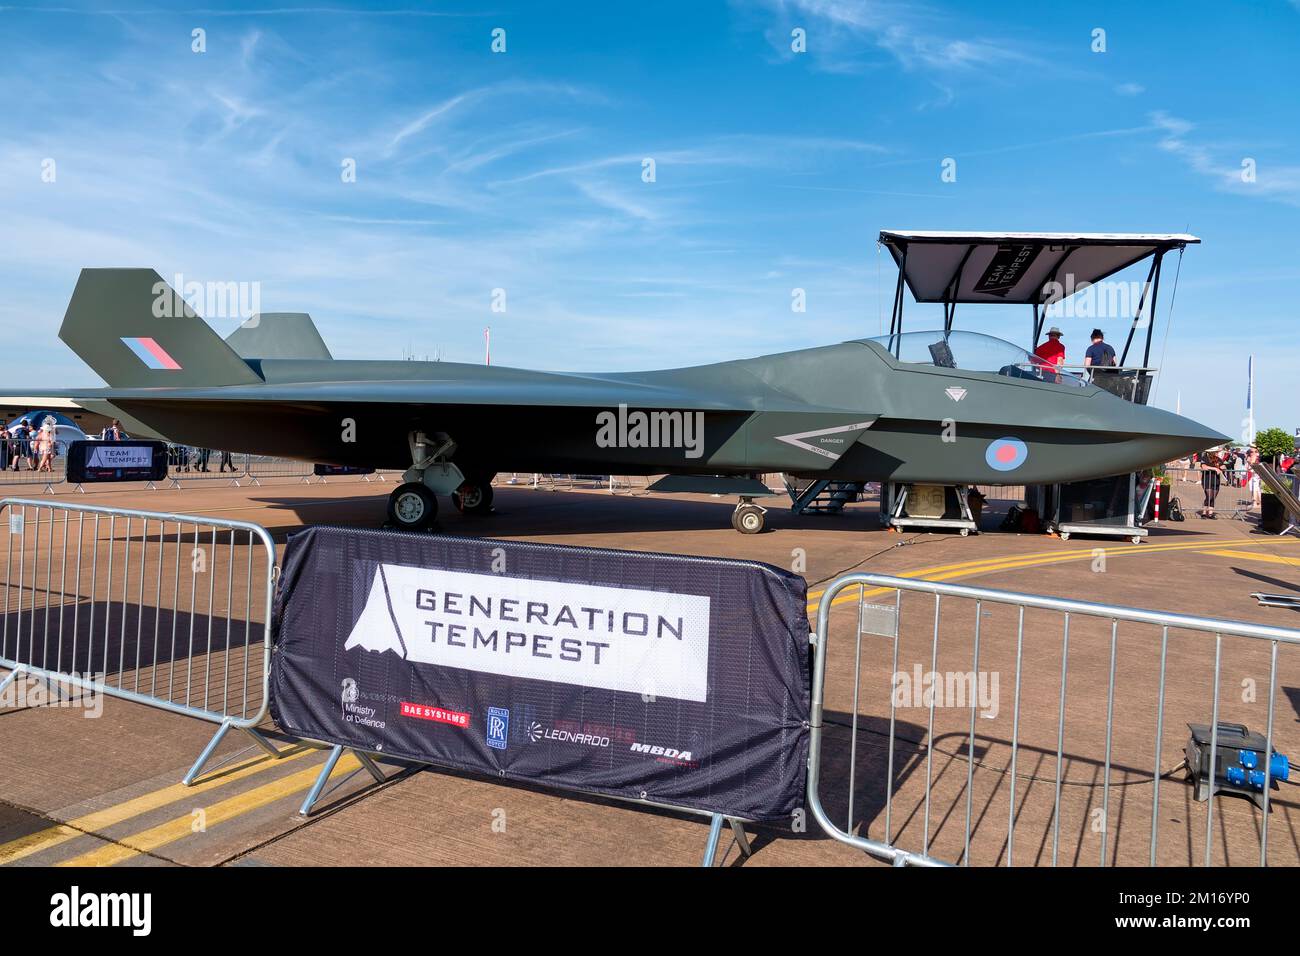 RAF Fairford,Gloucestershire,UK - July 16 2022: BAE Systems Team Tempest Full Scale concept model of a Tempest Sixth-Generation future combat aircraft Stock Photo